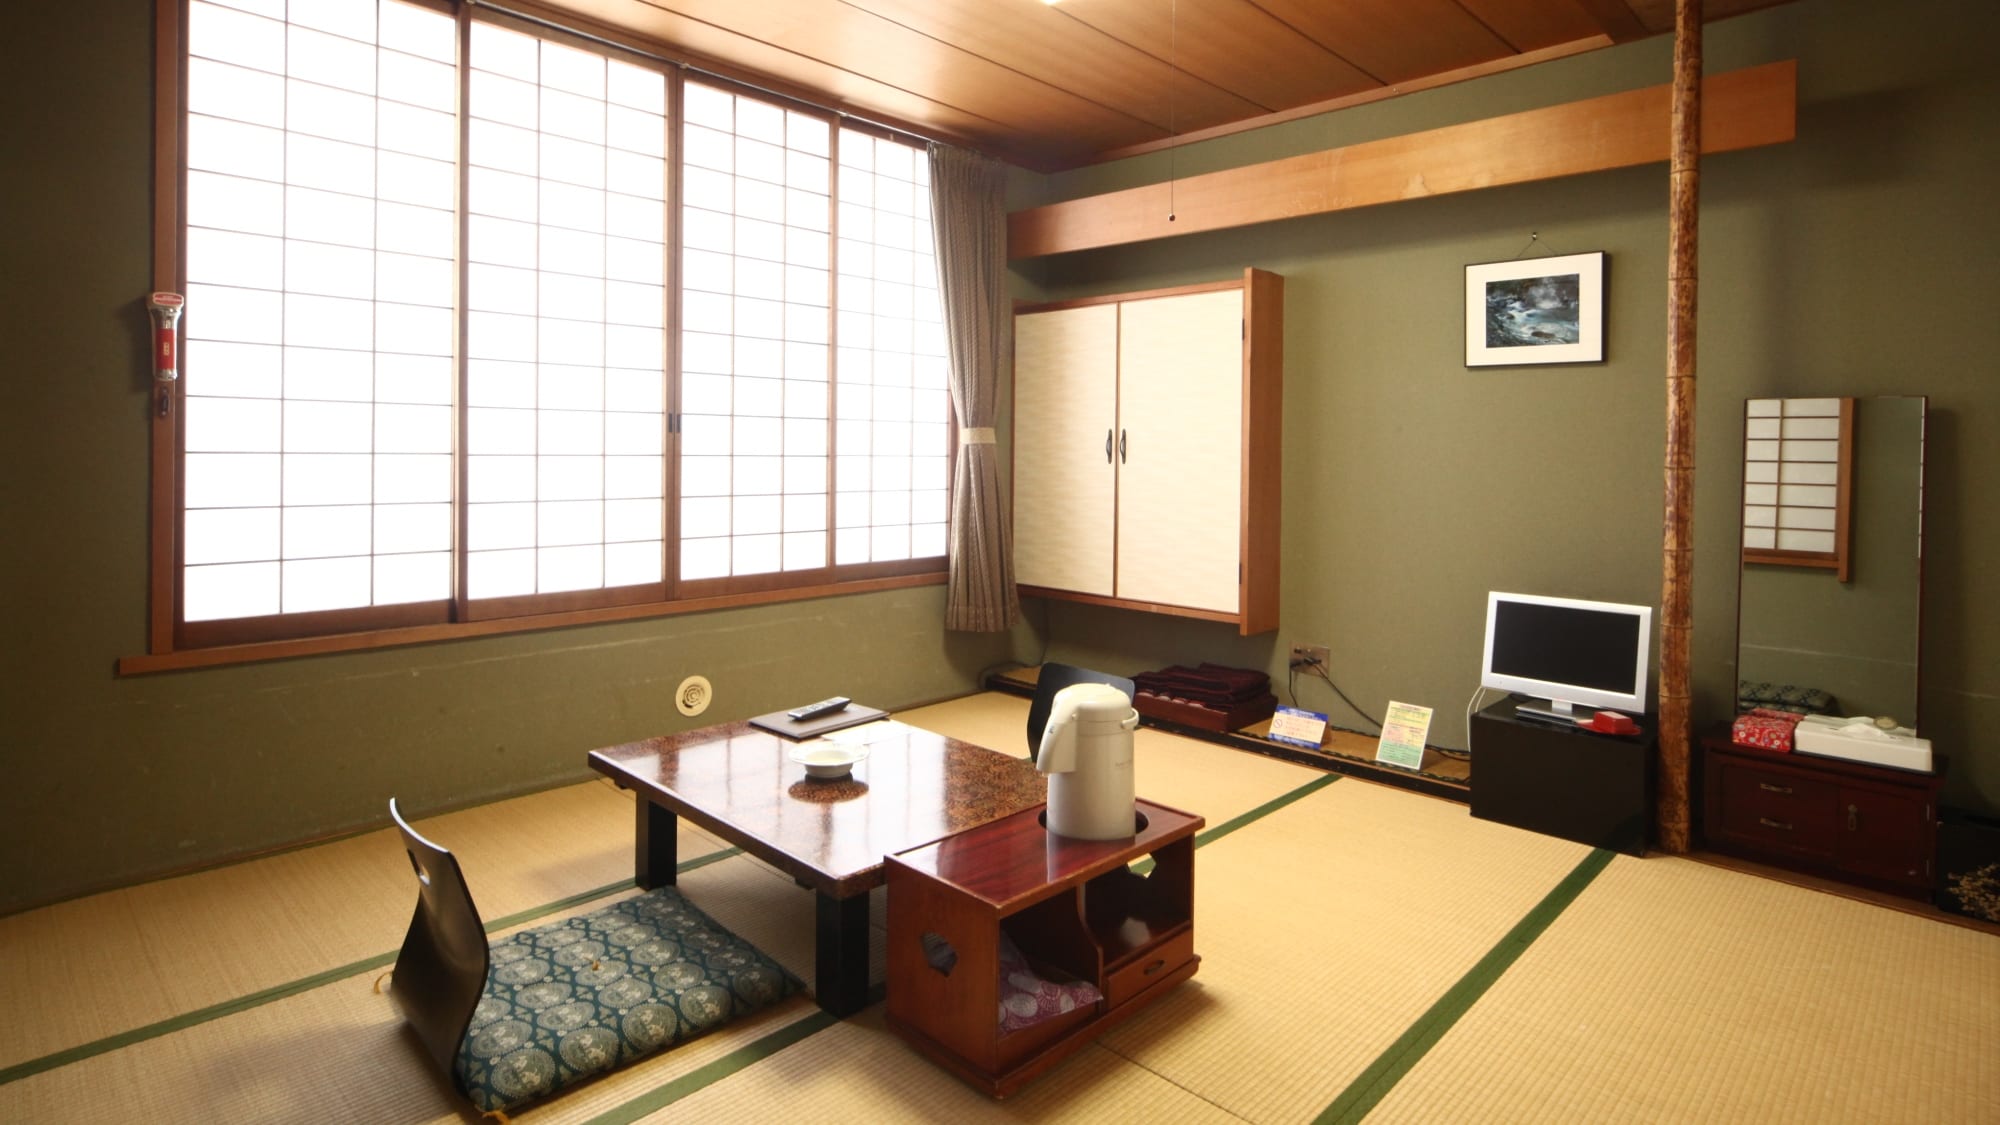 An example of a room (Japanese-style room part of Japanese-Western style room)